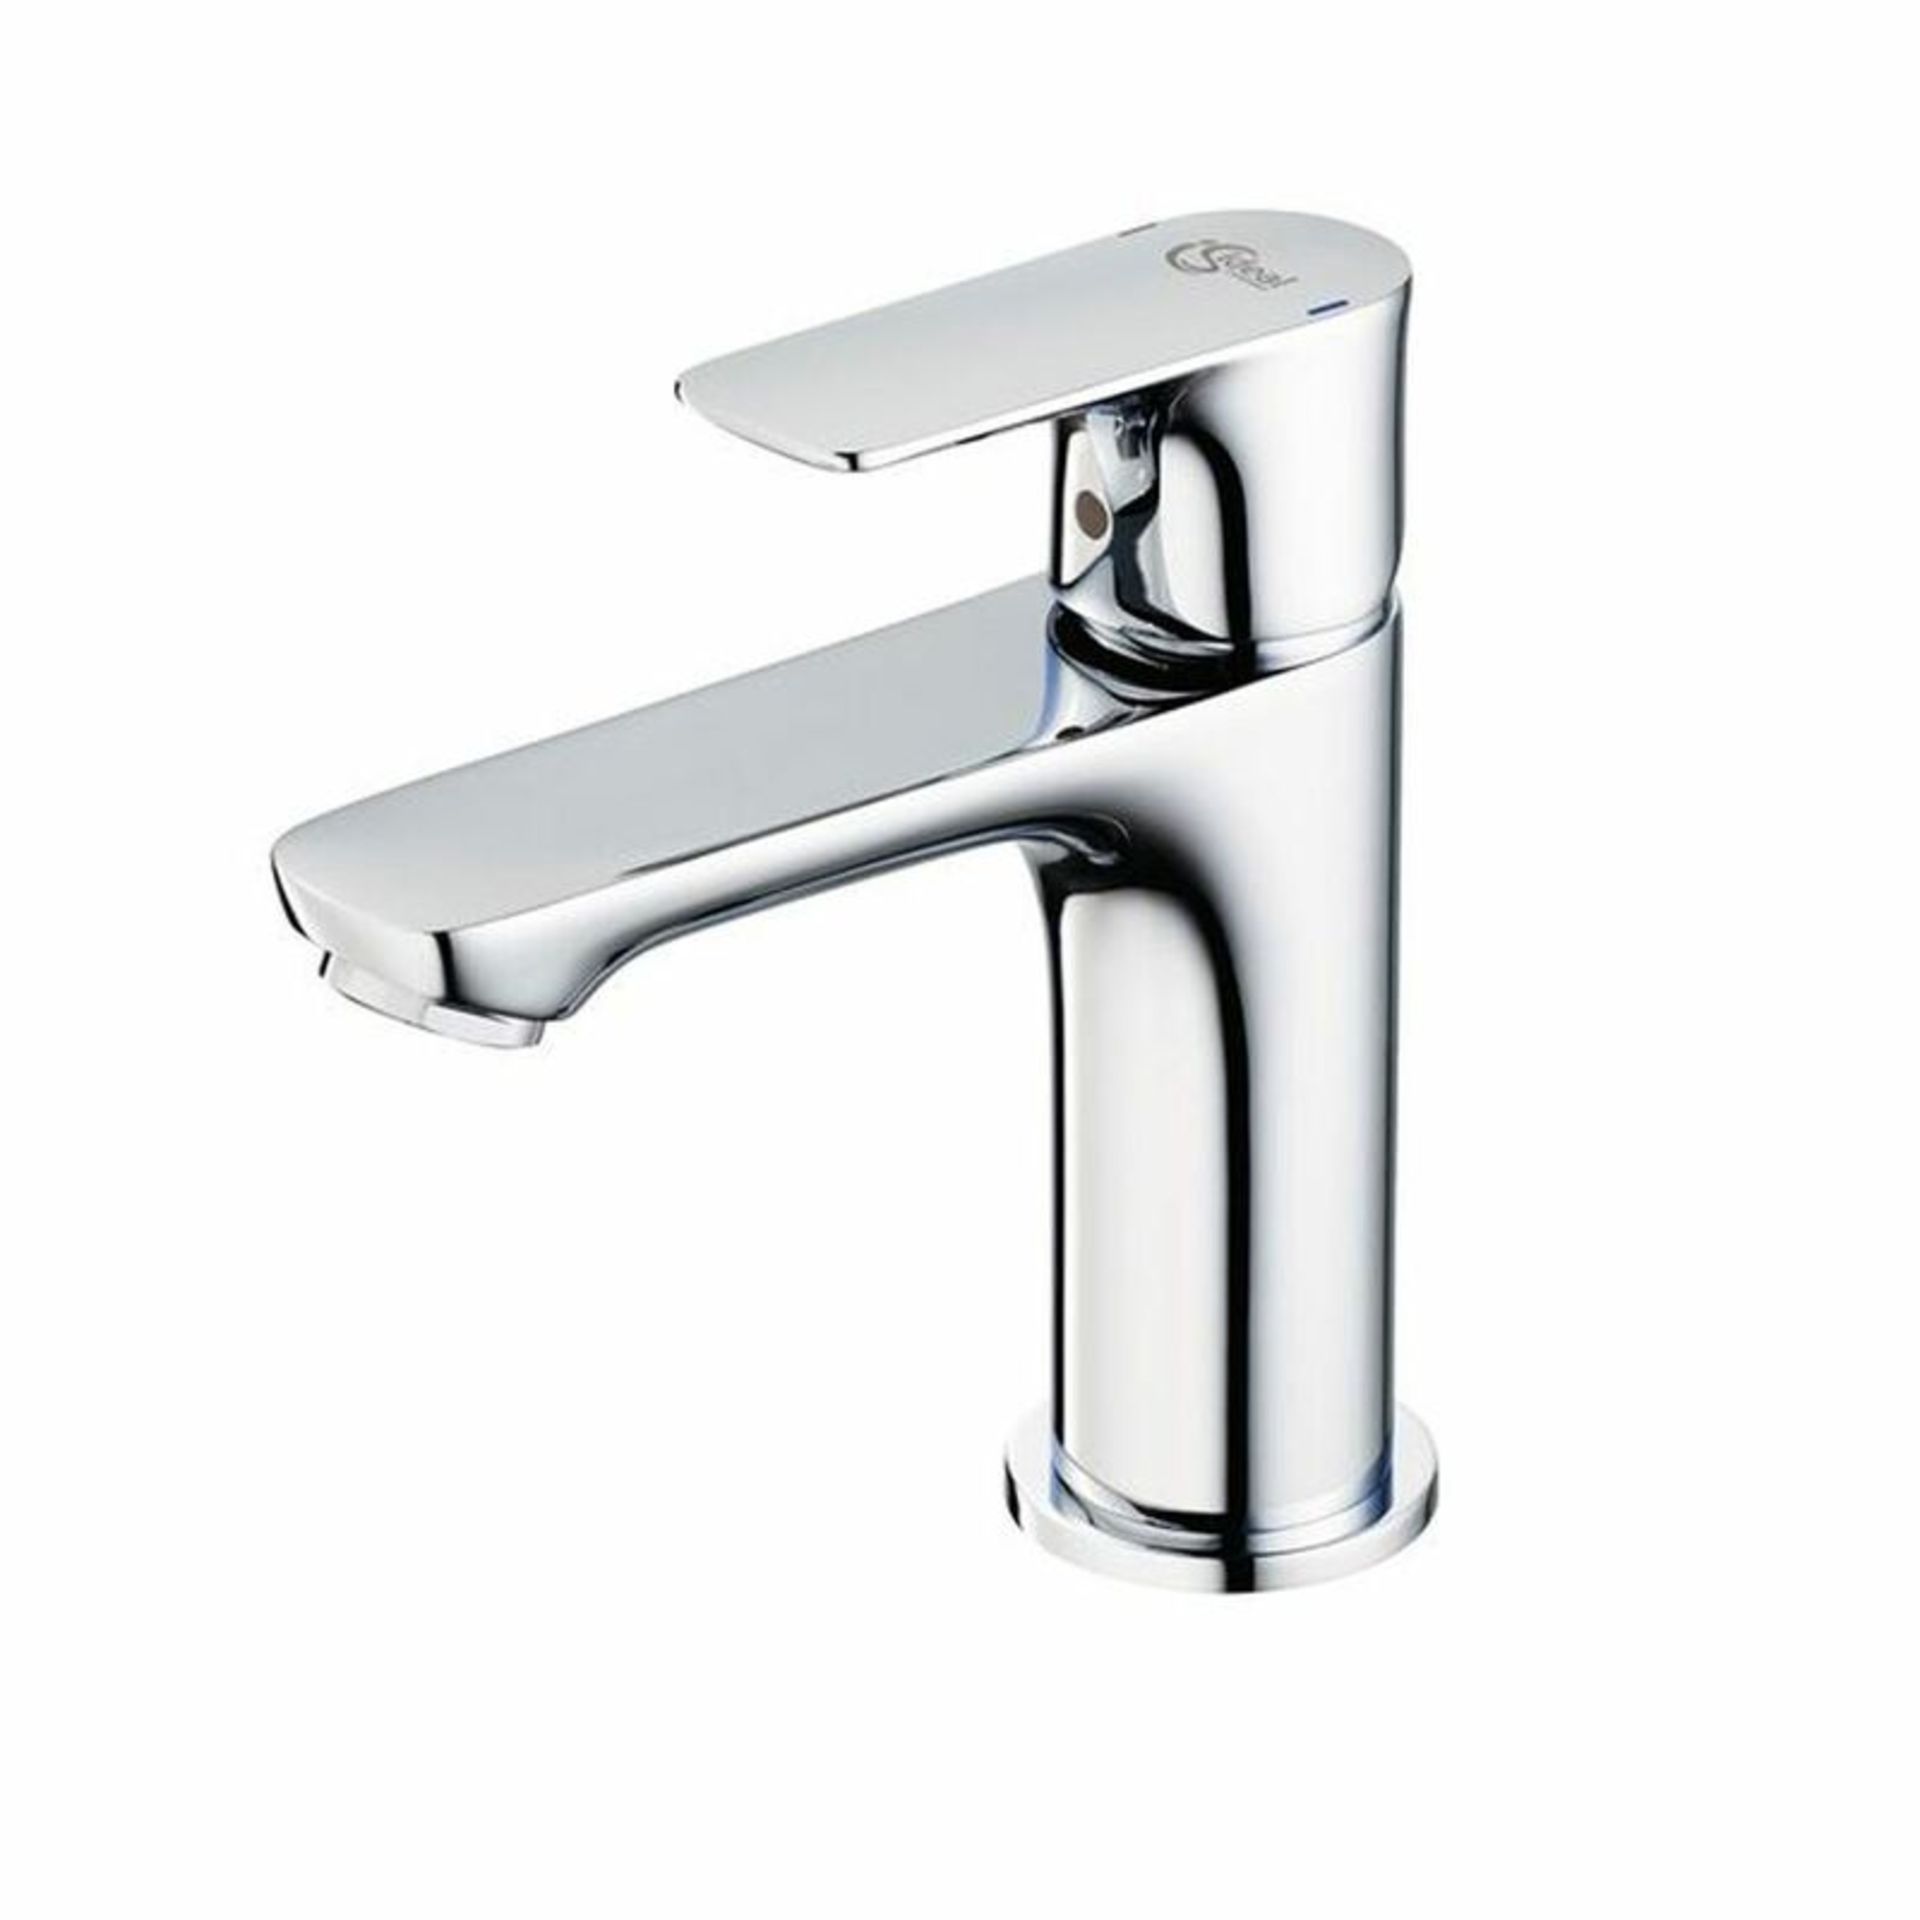 1 x Ideal Standard Concept Air Slim Style Chrome Basin Mixer Tap No Waste - New Boxed Stock